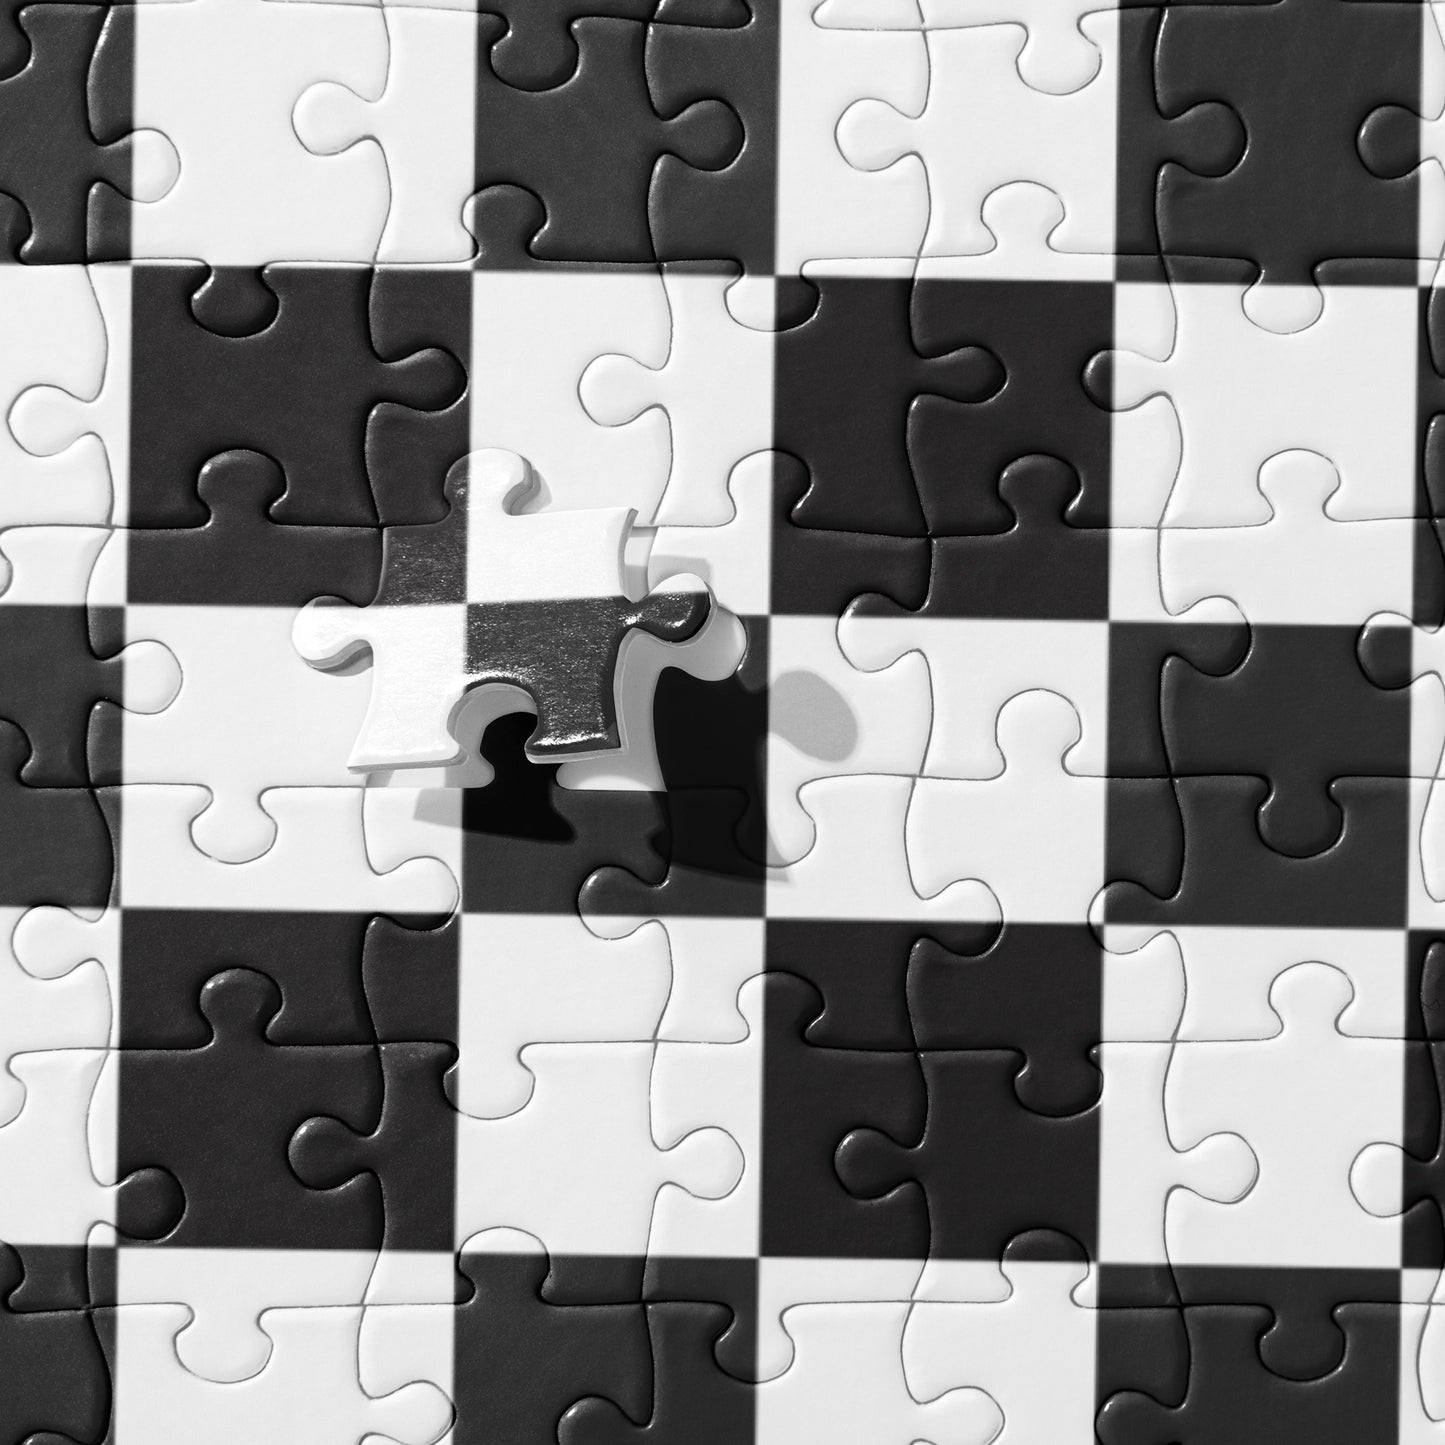 WONKY CHECKED SPLATTERED JIGSAW PUZZLE in B&W